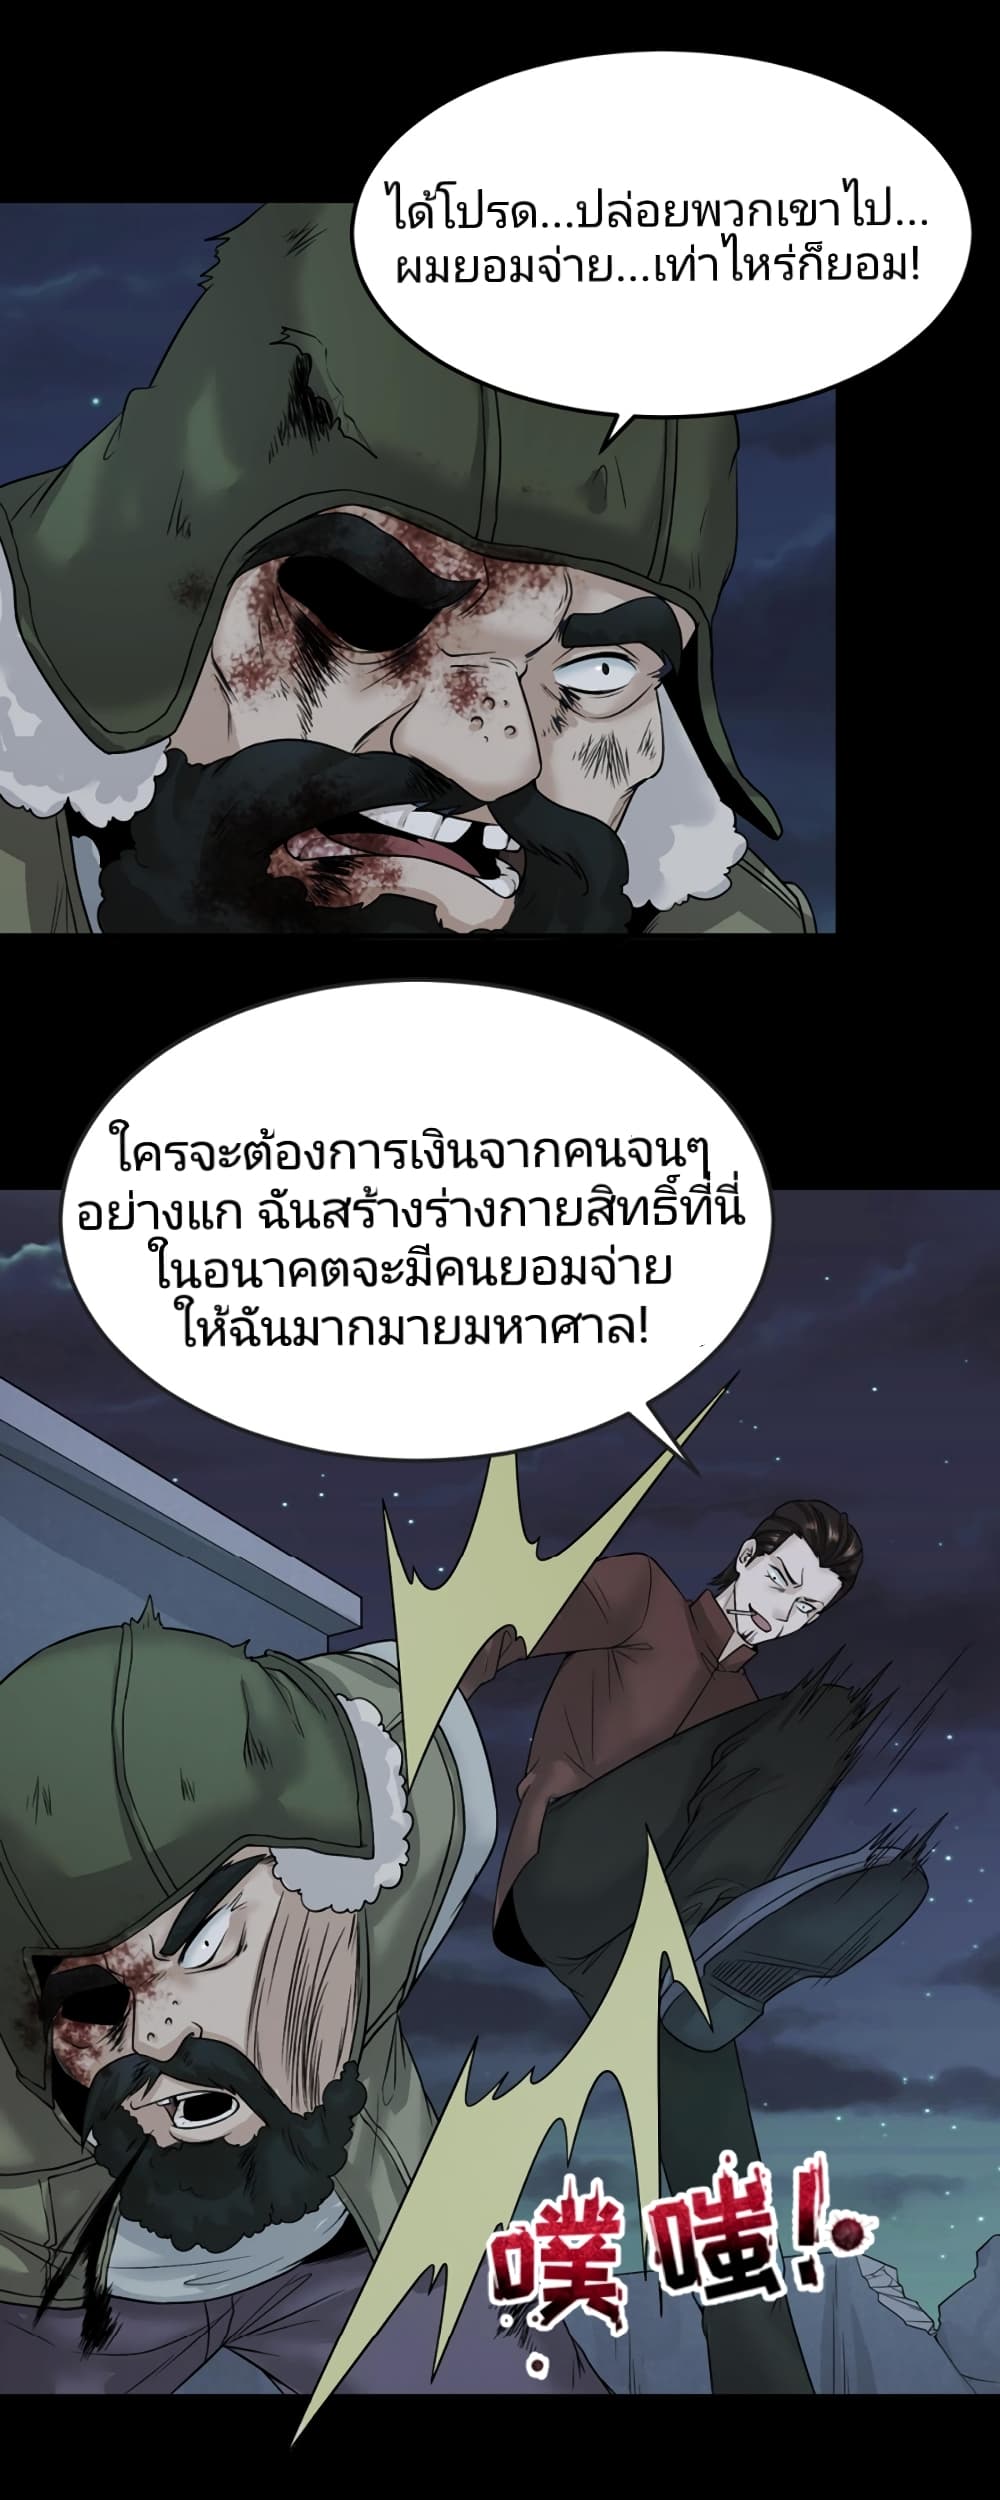 The Age of Ghost Spirits à¸à¸­à¸à¸à¸µà¹ 33 (12)